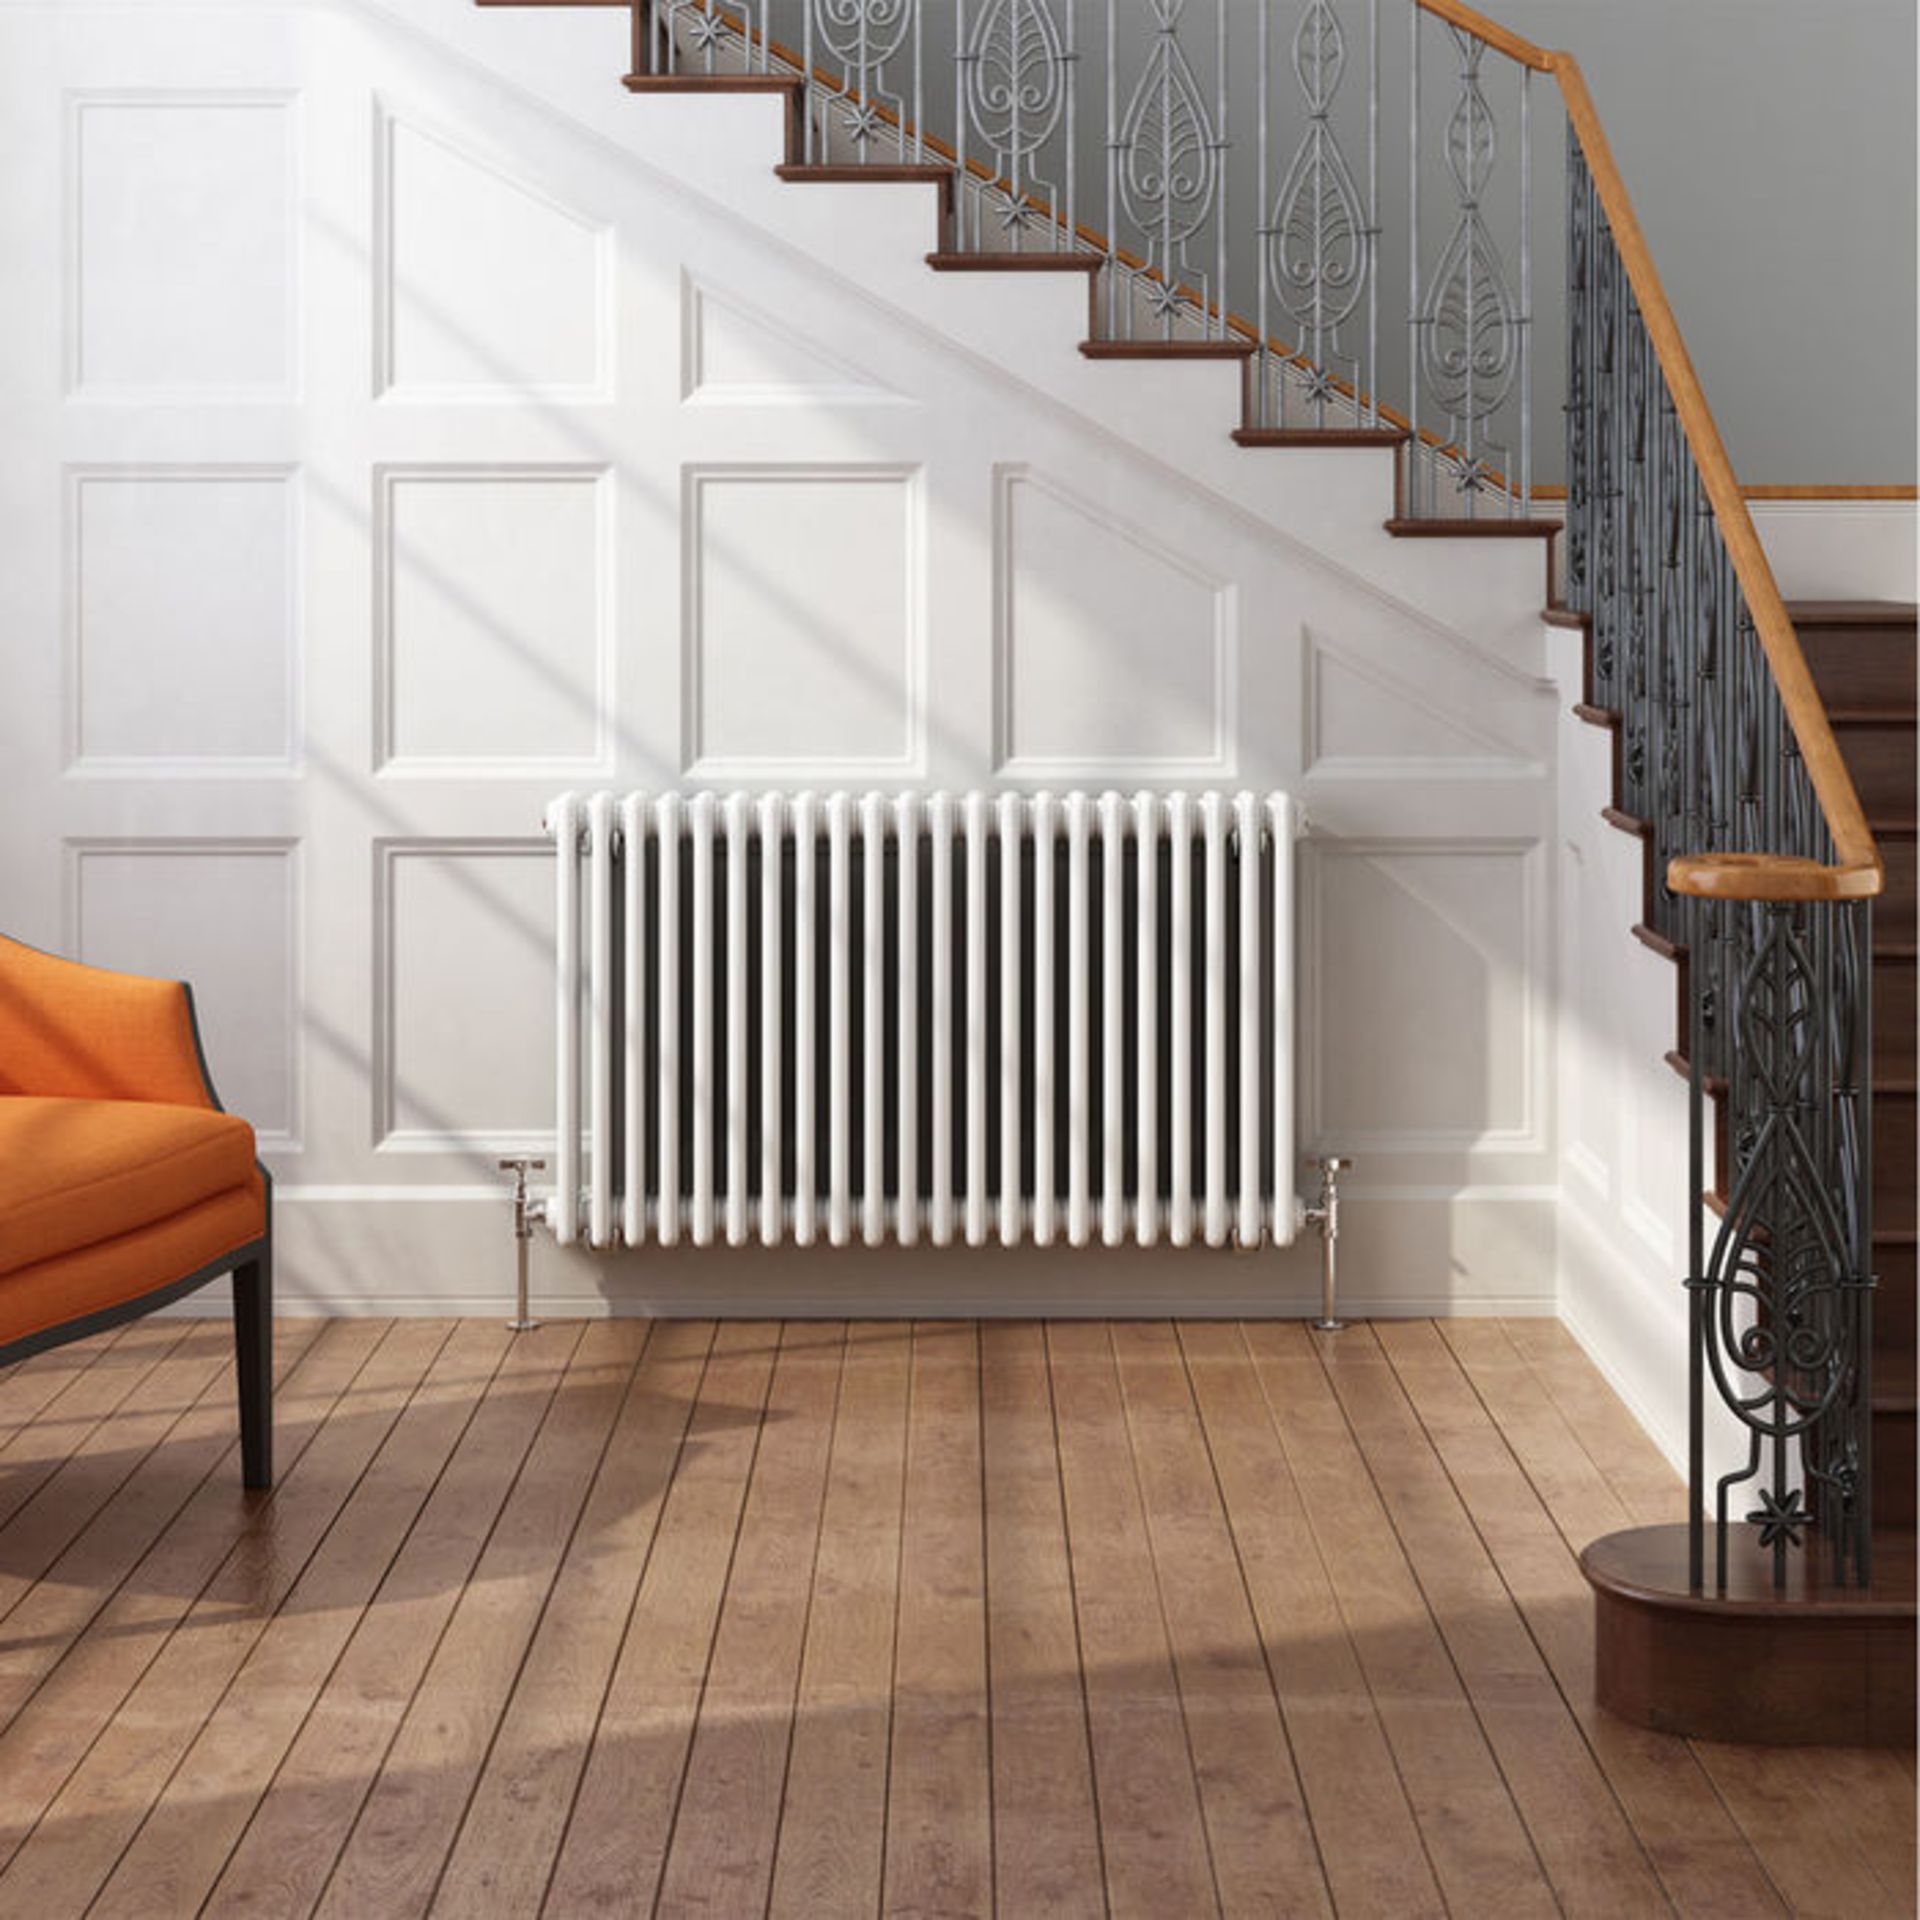 (AL61) 600x1008mm White Double Panel Horizontal Colosseum Traditional Radiator. RRP £439.99. Made